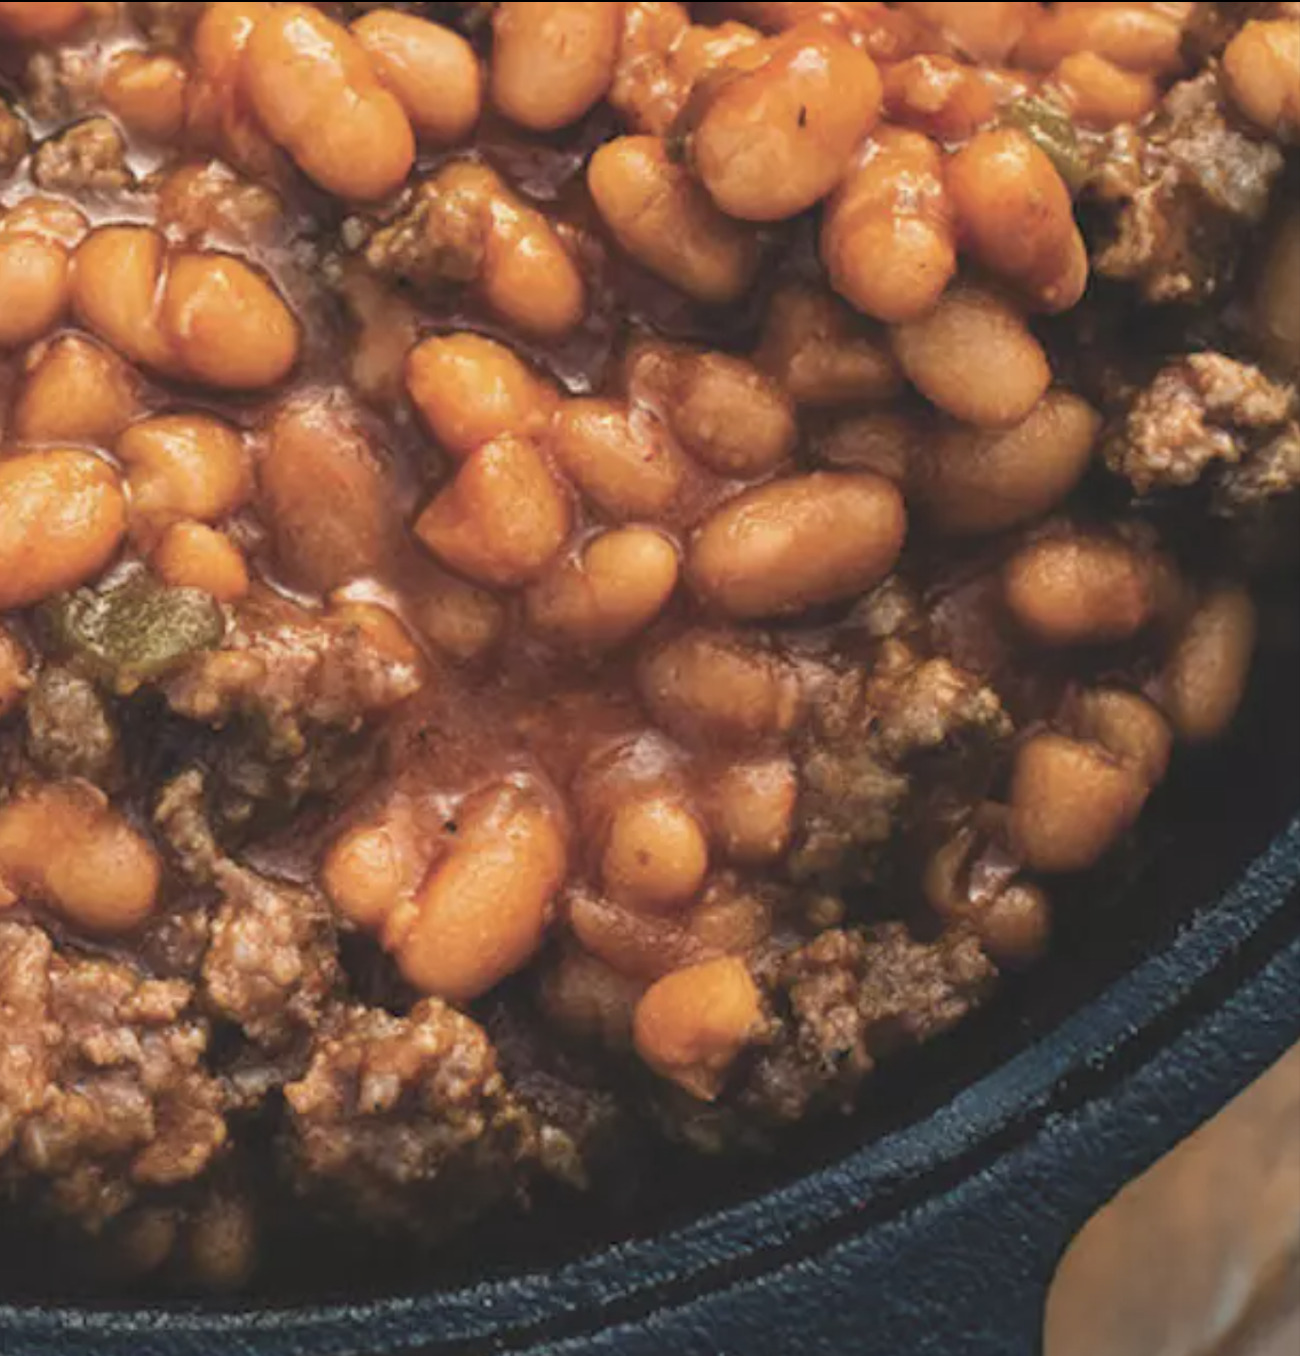 A big skillet of baked beans for the Fourth of July